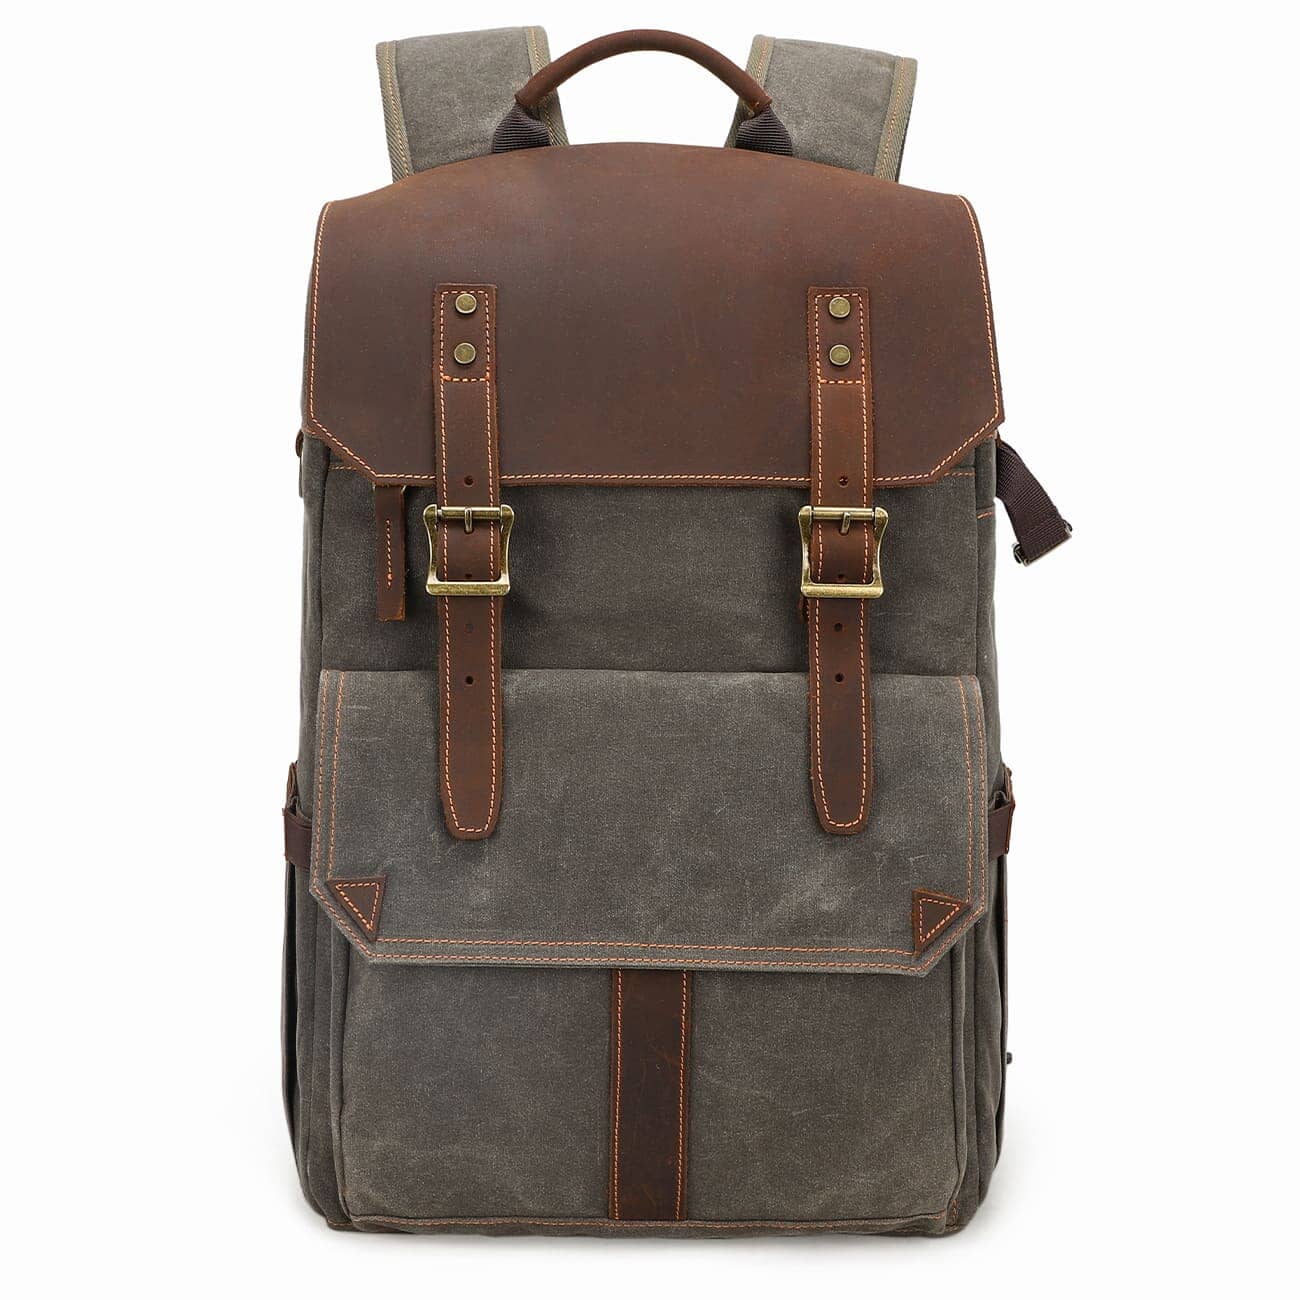 Camera backpack bag army green waxed canvas crazy horse leather